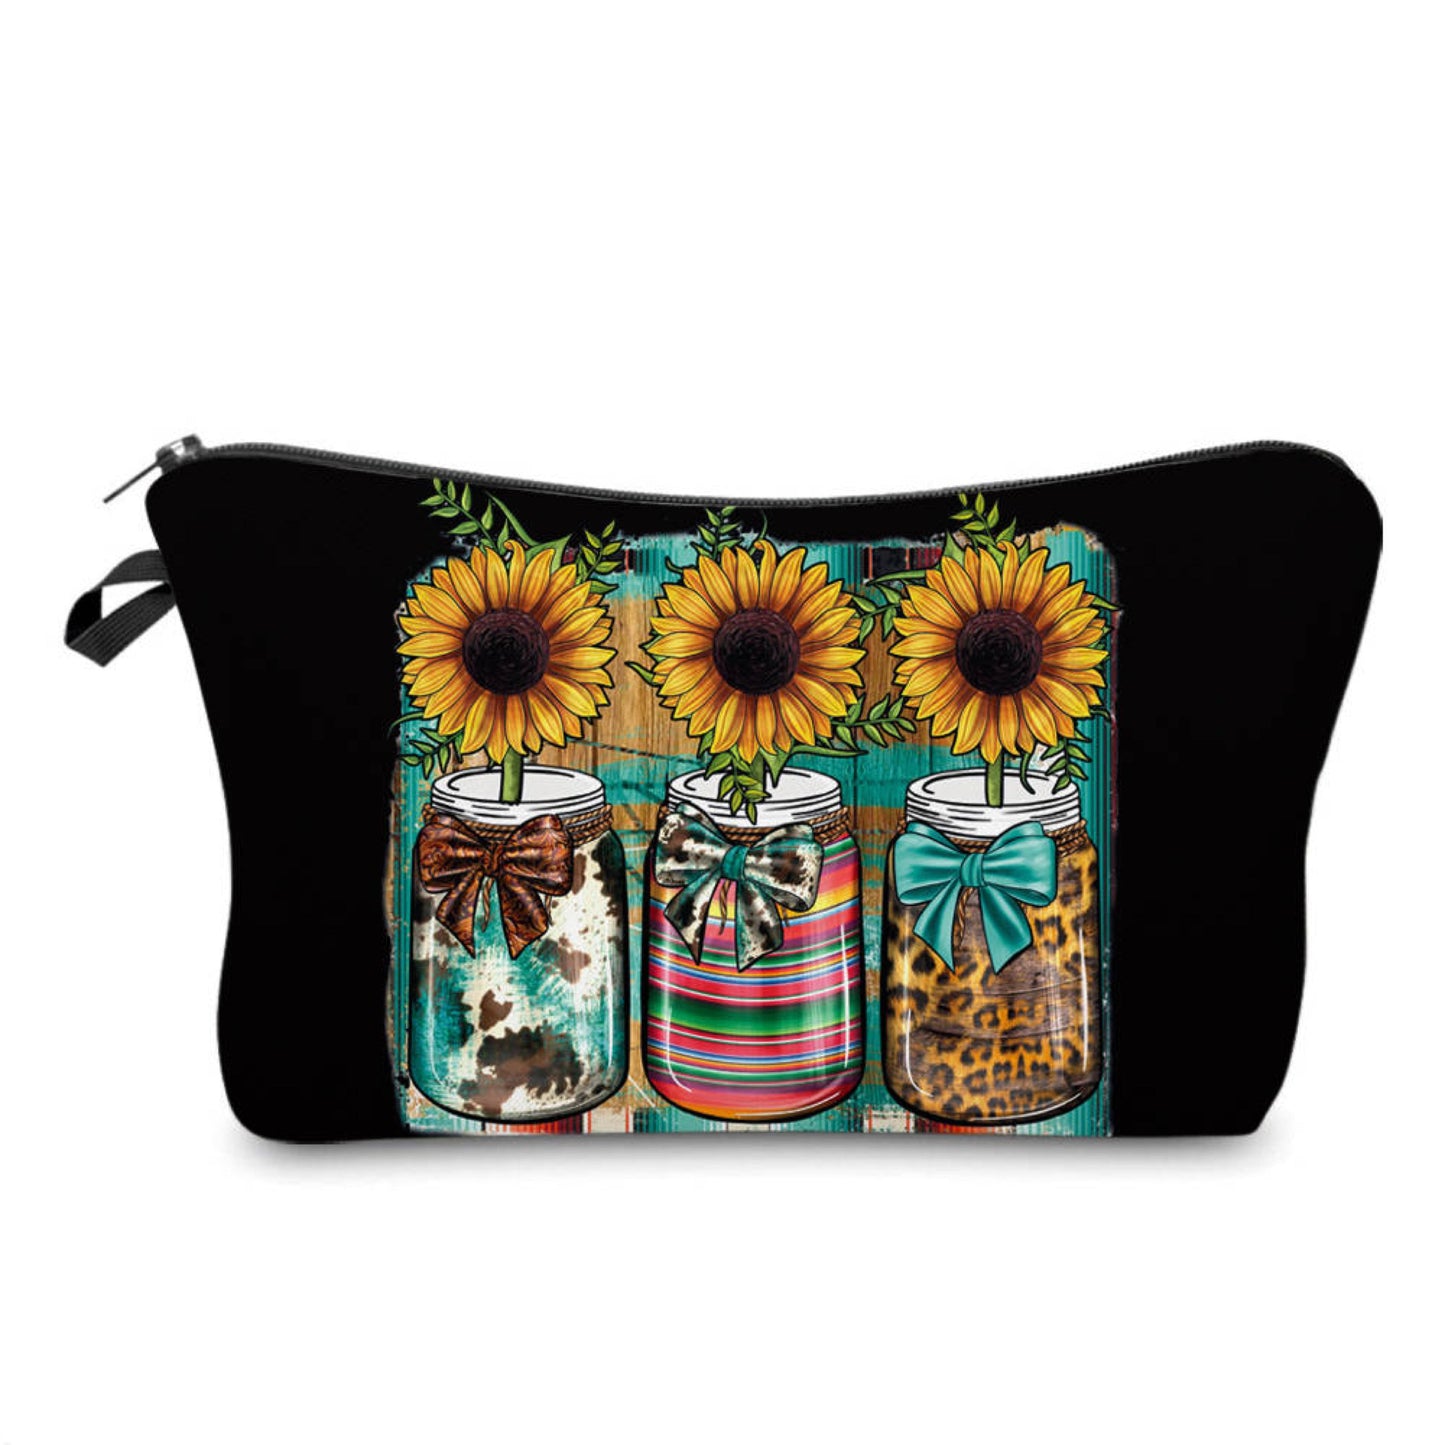 Mason Jar Sunflower - Water-Resistant Multi-Use Pouch